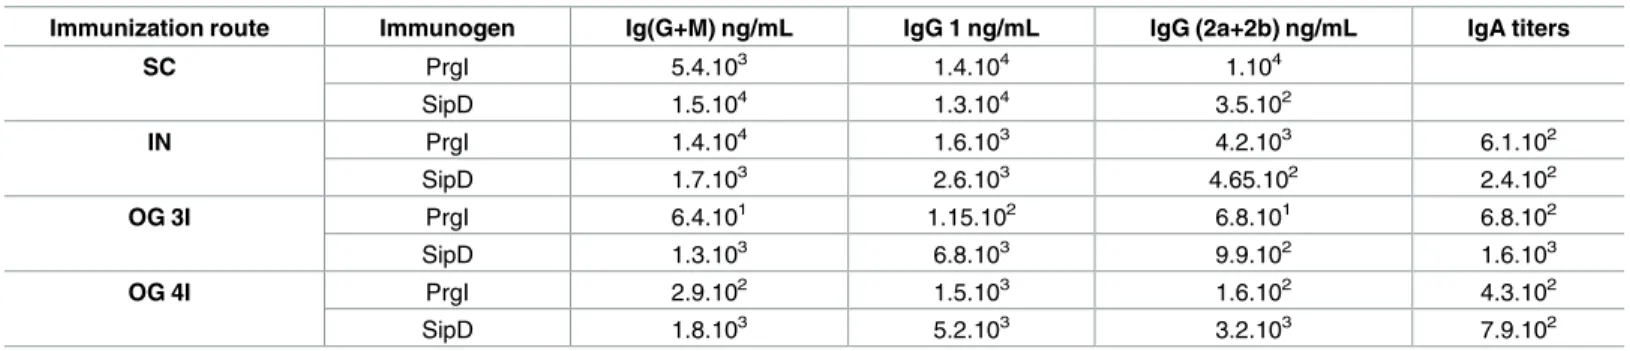 Table 1. Summary of the antibody responses (IgG and IgA) after the last immunization with PrgI or SipD by the SC, IN and OG routes.